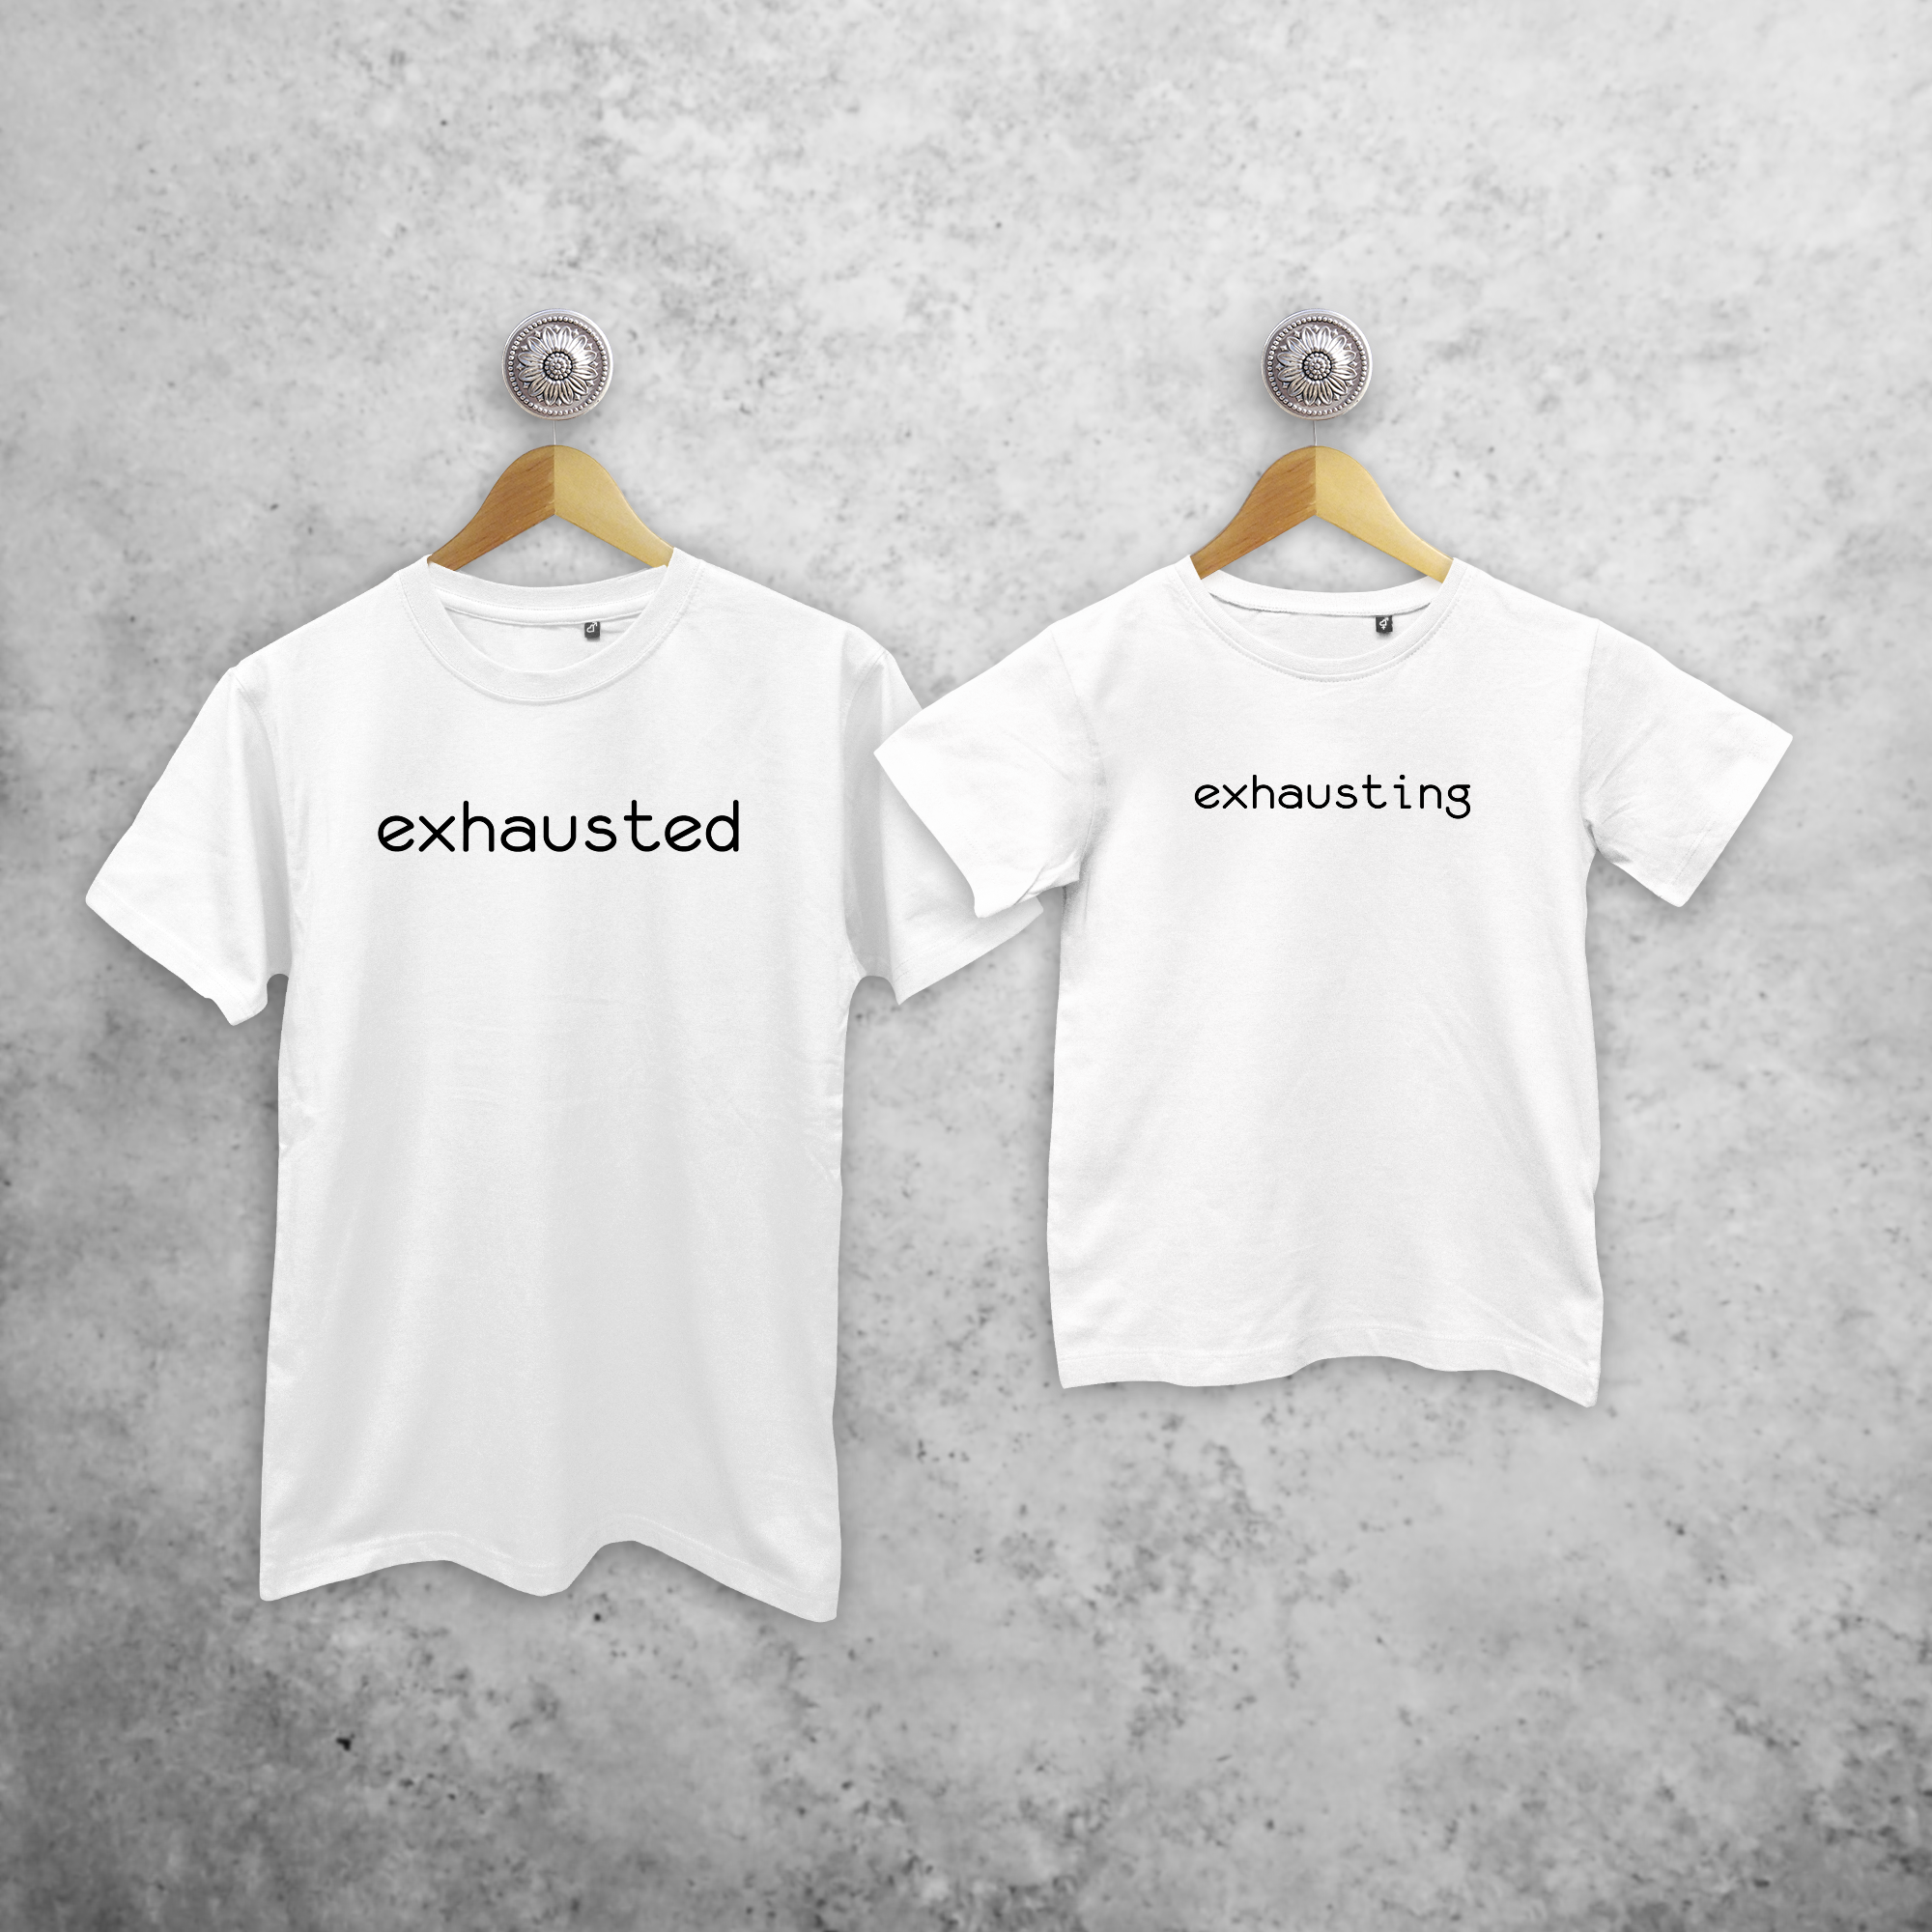 'Exhausted' & 'Exhausting' matchende shirts